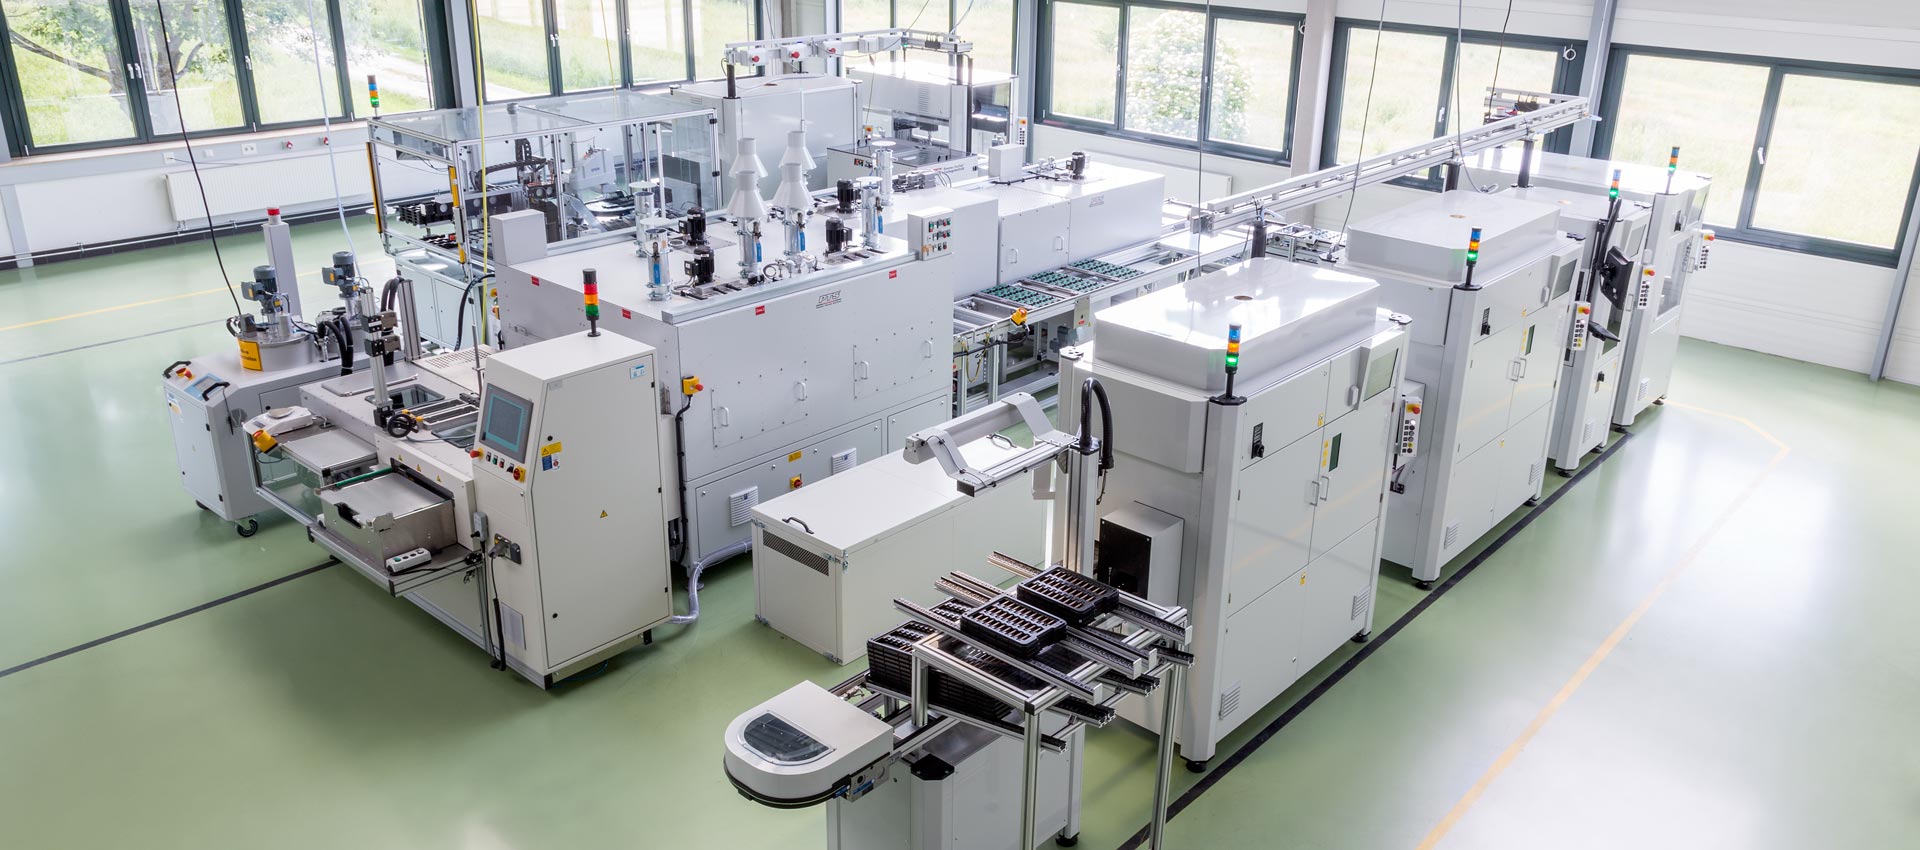 Semi-automatic assembly line for sensor units with in-line casting. The following processes are integrated: Caulking, laser soldering, casting, laser welding, leak testing. Cycle time < 12 seconds.